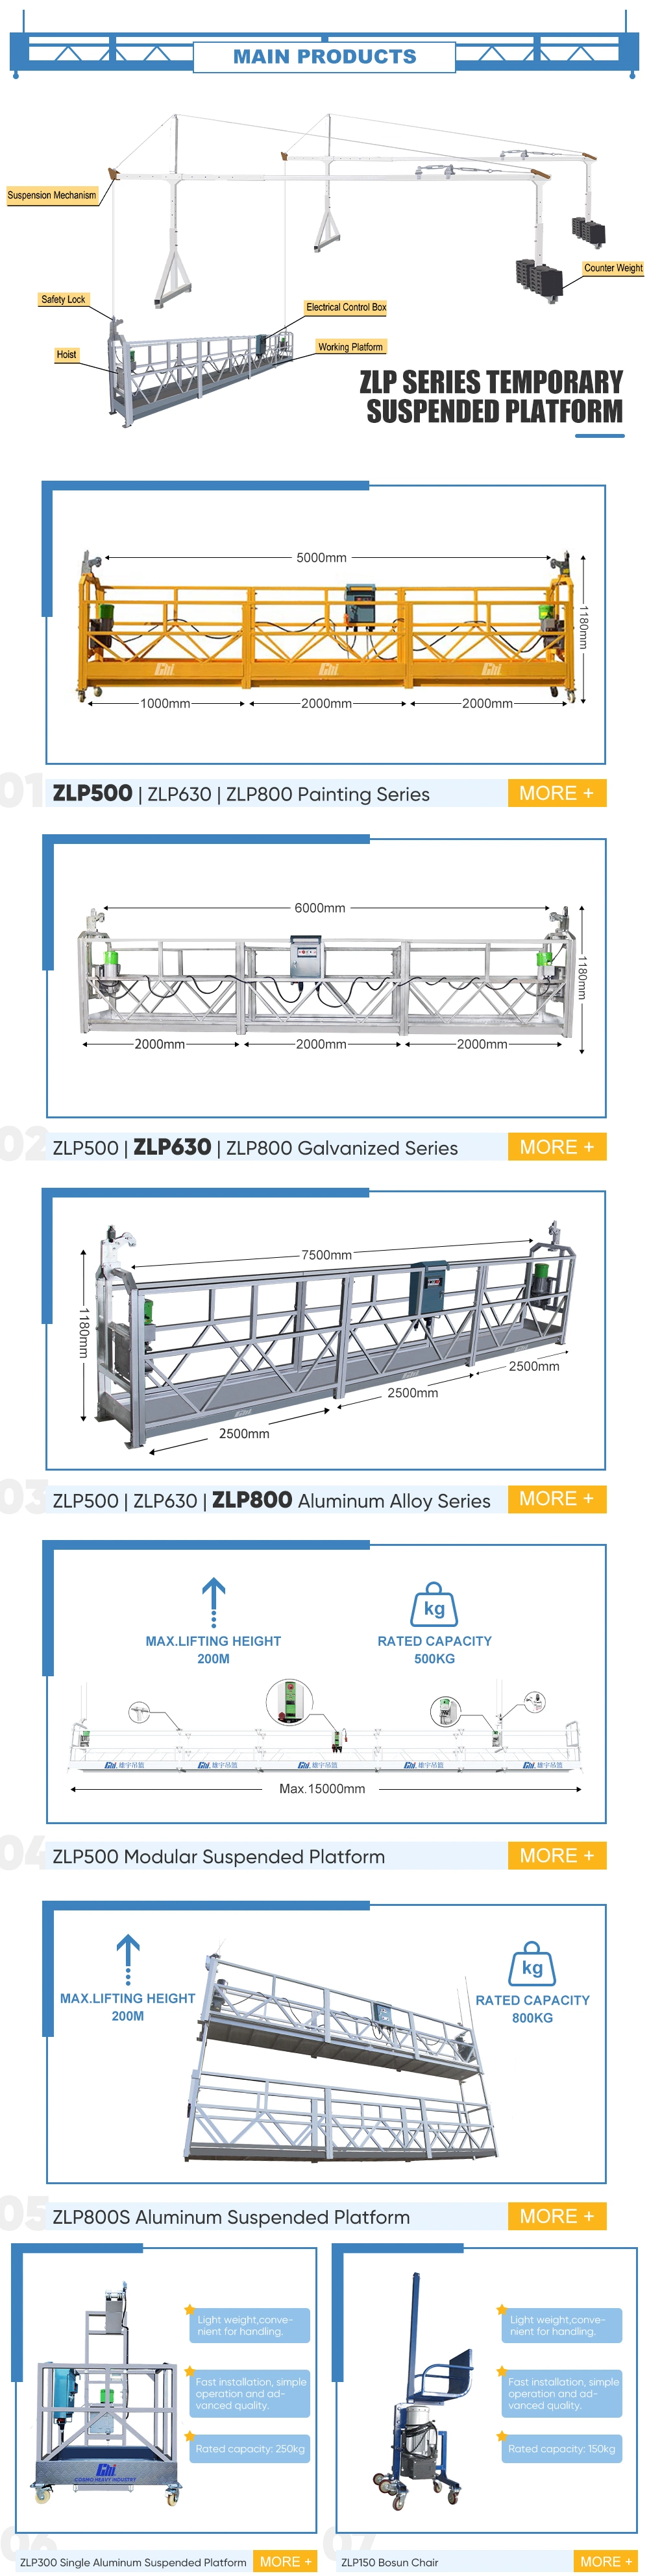 Zlp800,800kg,7.5m Aluminum Alloy Suspended Lifting Platform,Cradle,Gondola for Building Facade Window Cleaning and Curtain Wall Installation with CE Approved